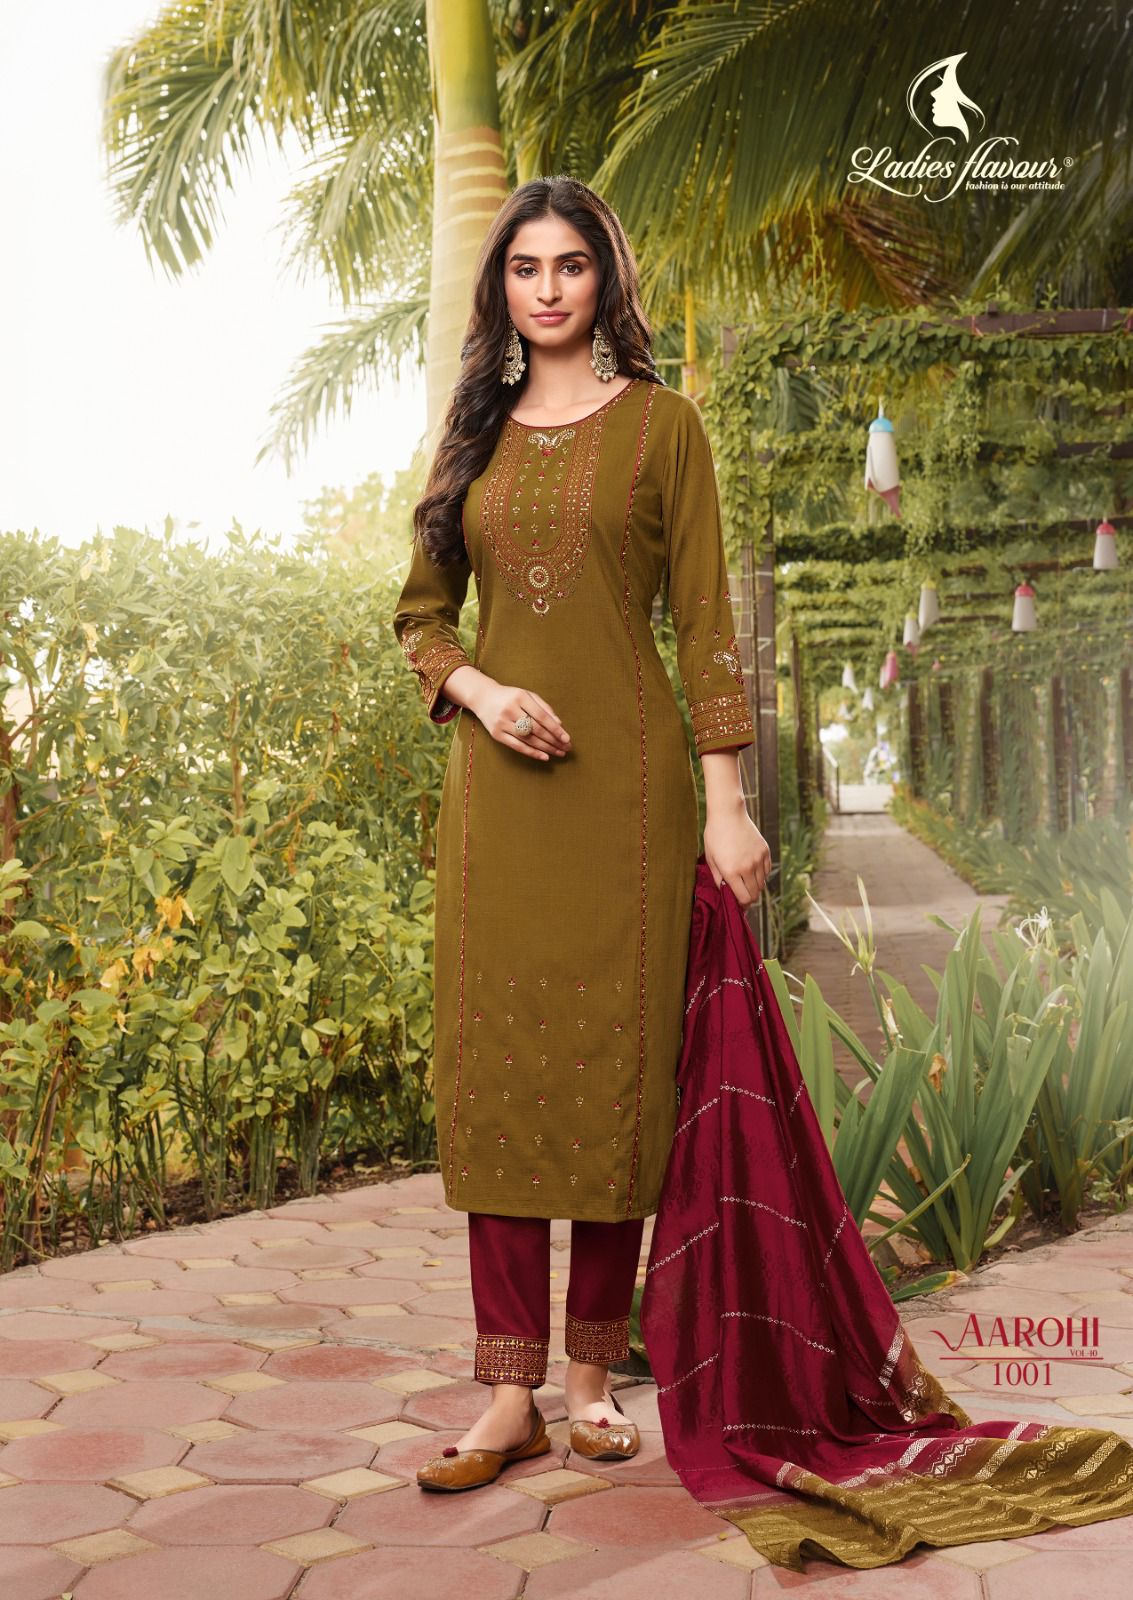 Ladies Flavour Aarohi Vol 10 collection 5